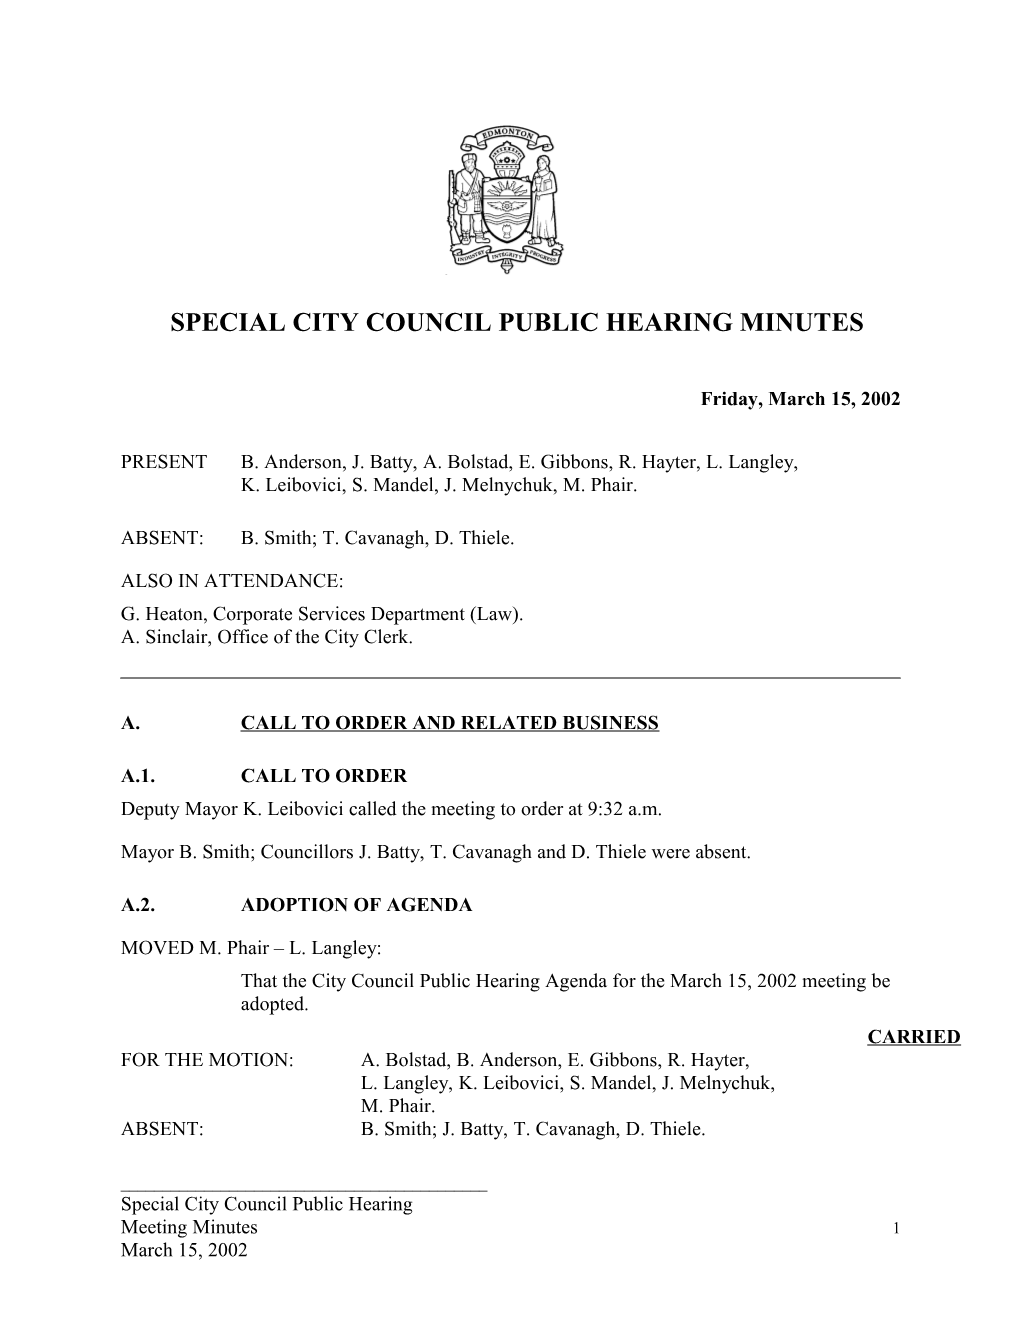 Minutes for City Council March 15, 2002 Meeting